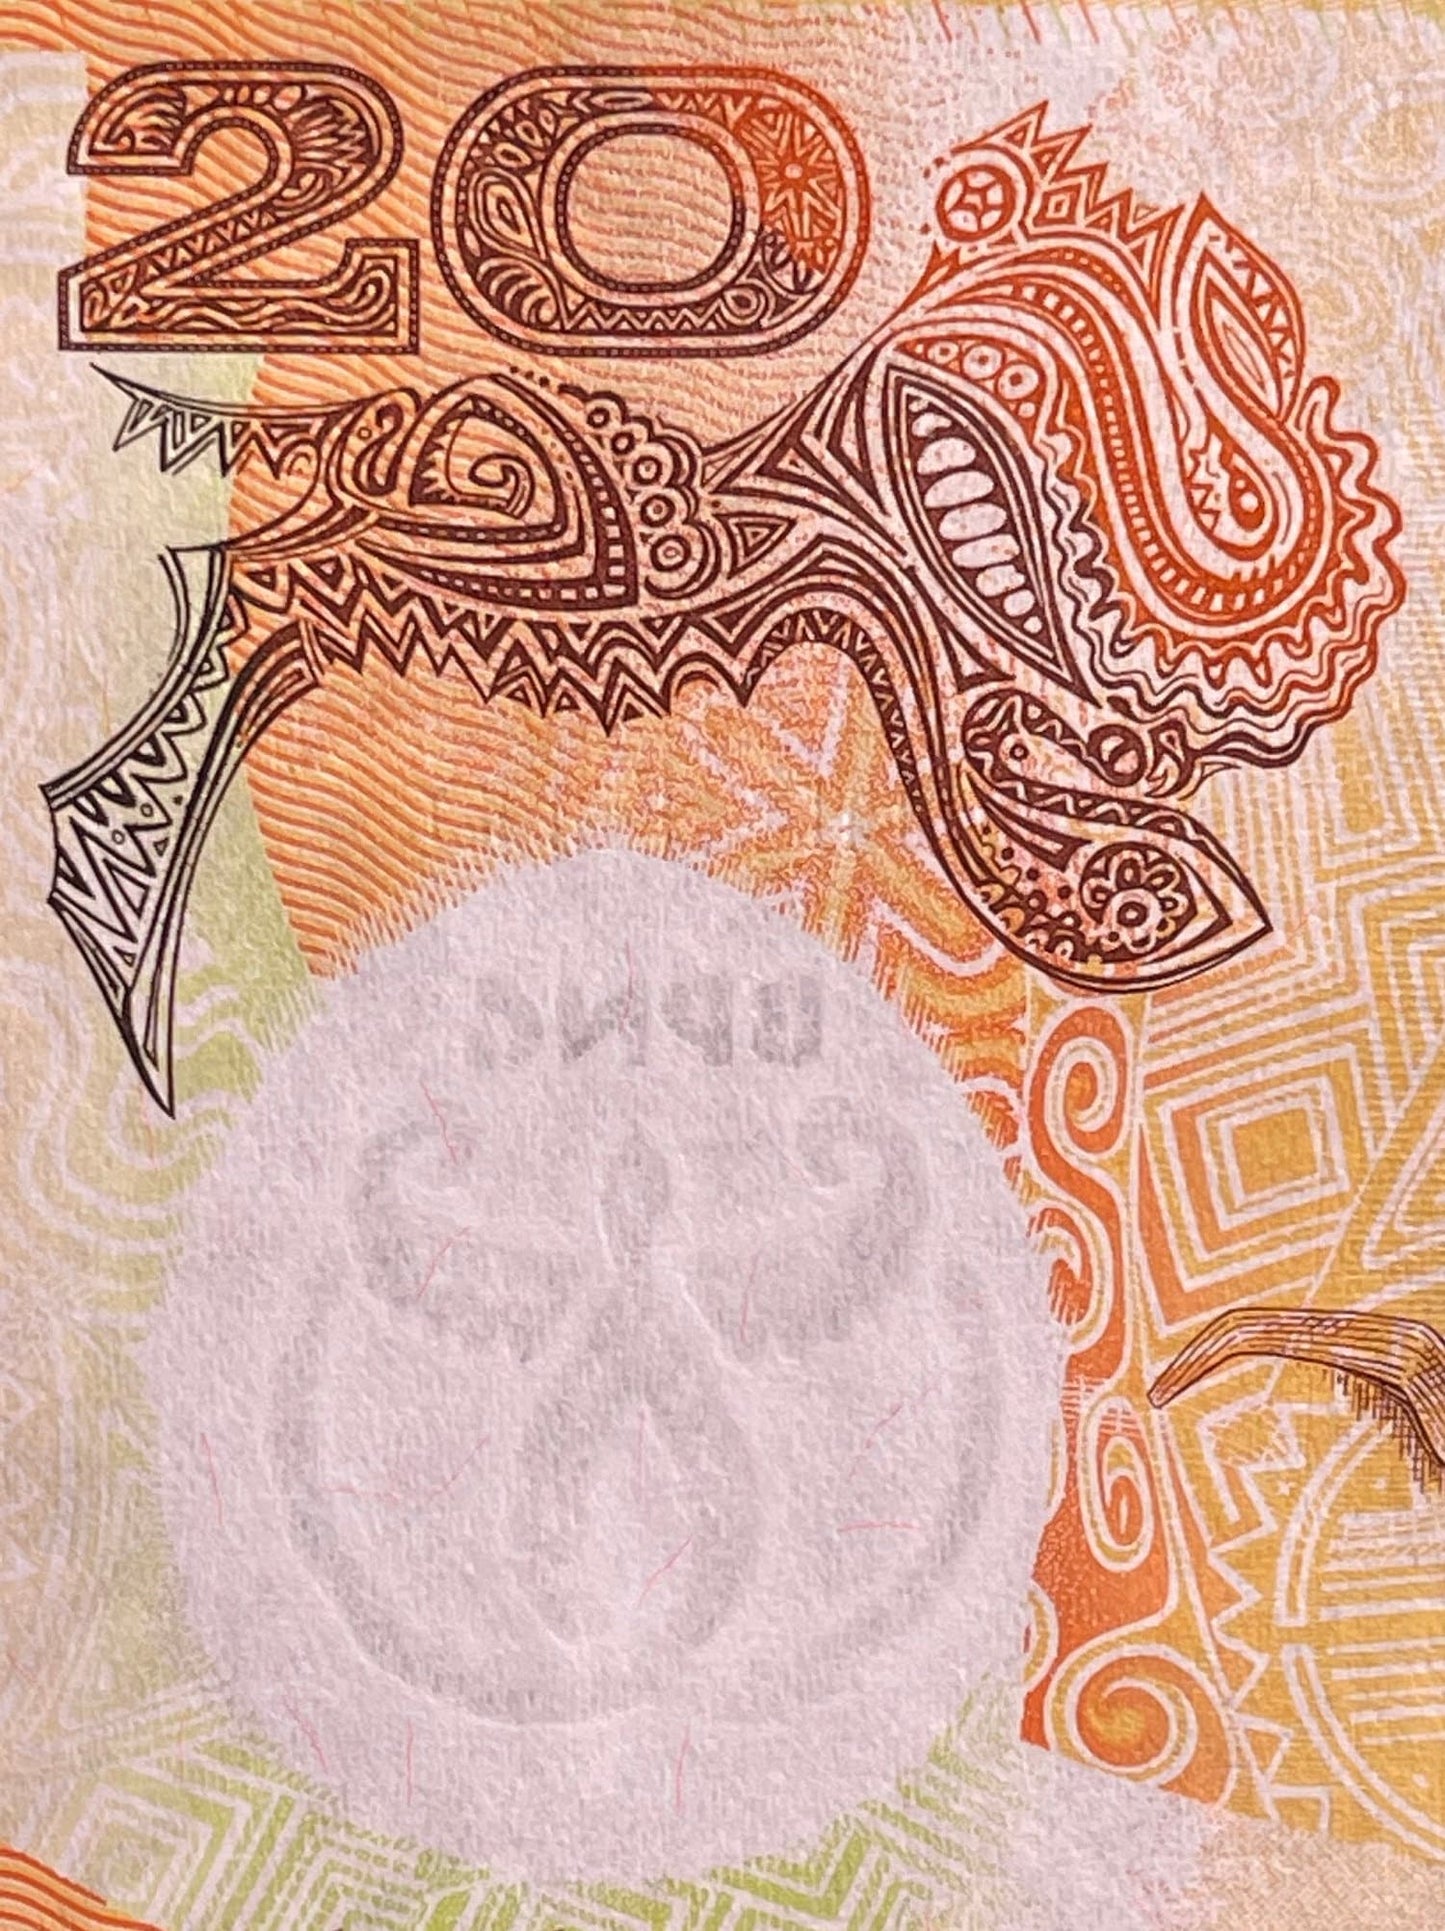 Wild Boar Head & National Parliament House 20 Kina Papua New Guinea Authentic Banknote Money for Jewelry and Collage (Capitalist Pig)